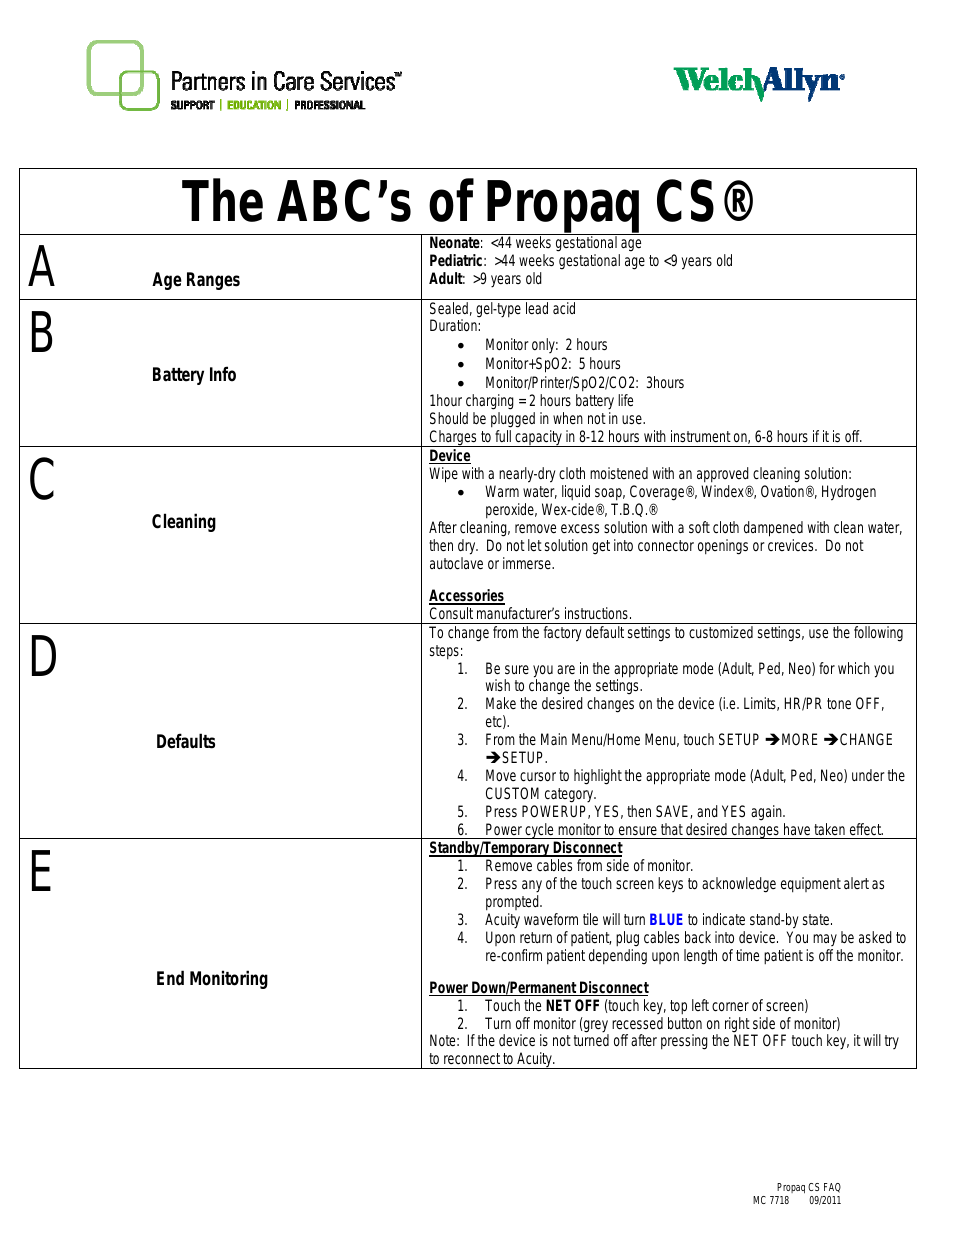 ABCs of Propaq CS - Quick Reference Guide